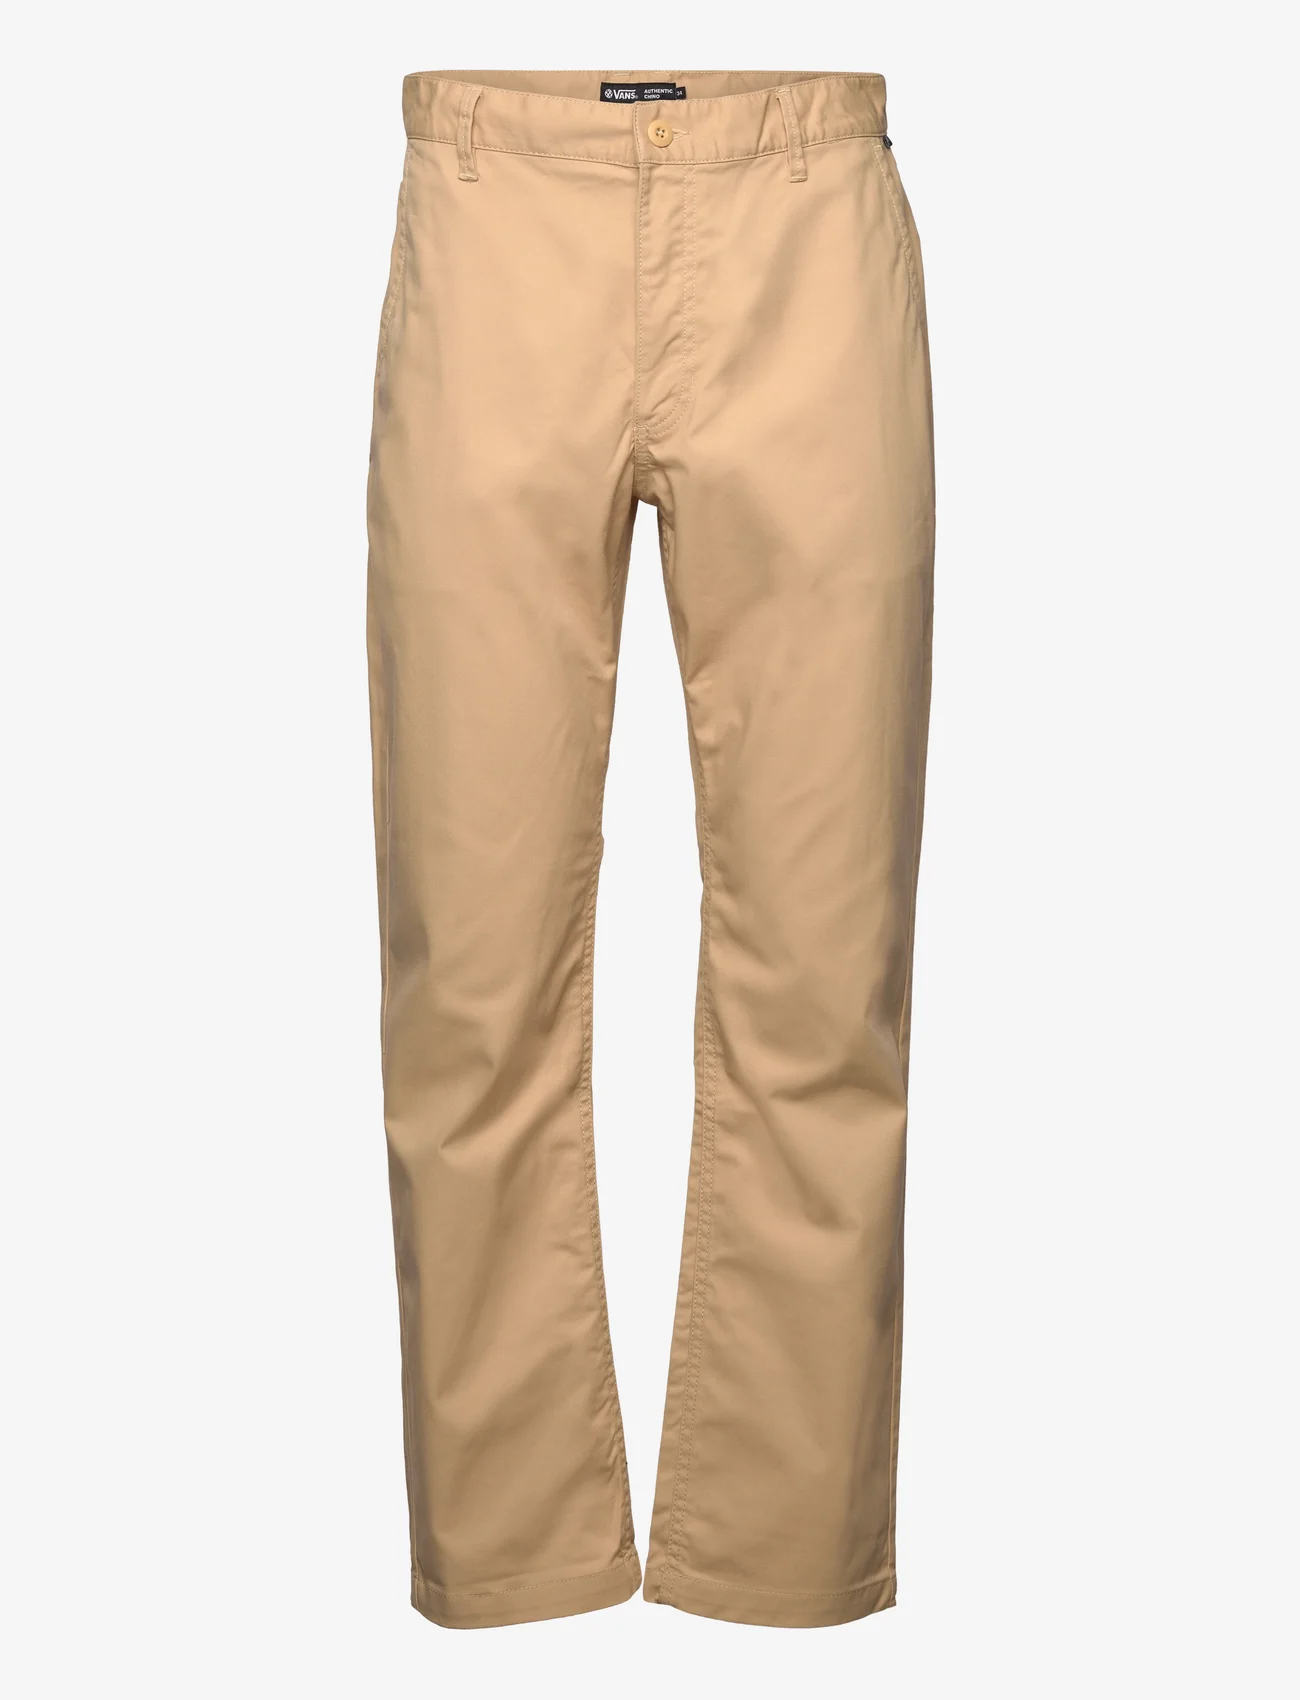 VANS - MN AUTHENTIC CHINO RELAXED PANT - taos taupe - 0